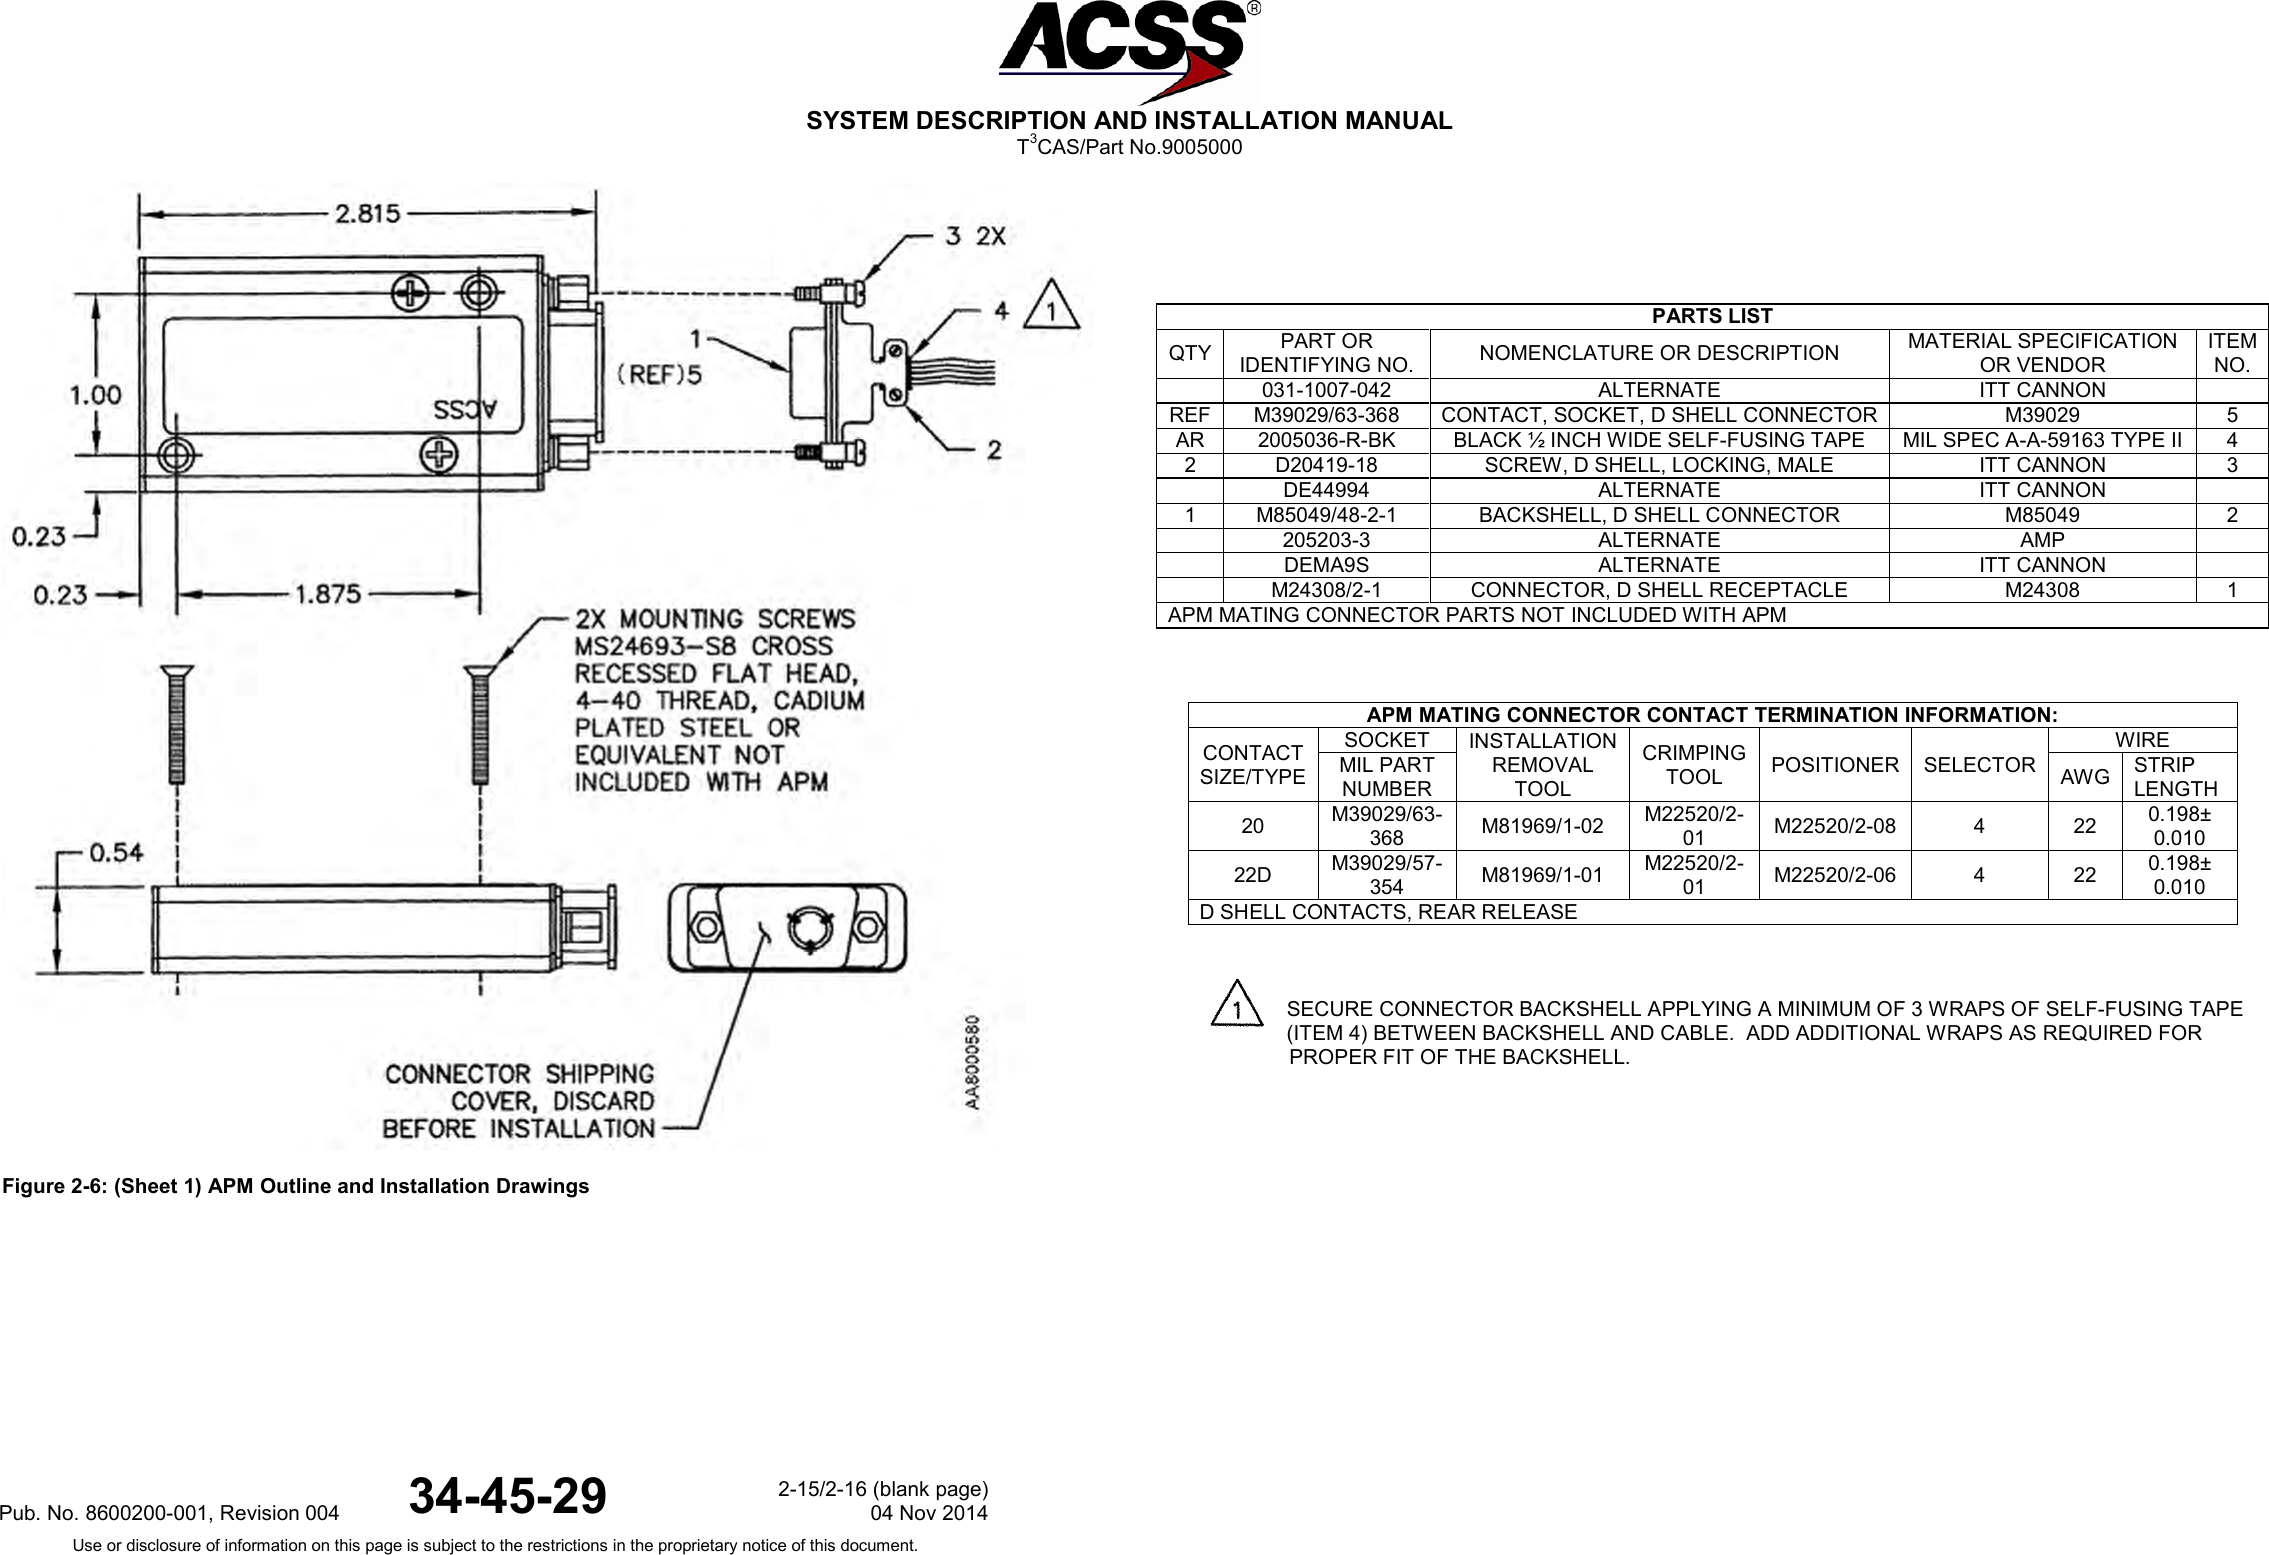  SYSTEM DESCRIPTION AND INSTALLATION MANUAL T3CAS/Part No.9005000   Figure 2-6: (Sheet 1) APM Outline and Installation Drawings               PARTS LIST QTY PART OR IDENTIFYING NO. NOMENCLATURE OR DESCRIPTION MATERIAL SPECIFICATION OR VENDOR ITEM NO.  031-1007-042 ALTERNATE ITT CANNON  REF M39029/63-368 CONTACT, SOCKET, D SHELL CONNECTOR M39029 5 AR 2005036-R-BK BLACK ½ INCH WIDE SELF-FUSING TAPE MIL SPEC A-A-59163 TYPE II 4 2 D20419-18 SCREW, D SHELL, LOCKING, MALE ITT CANNON 3  DE44994 ALTERNATE ITT CANNON  1 M85049/48-2-1 BACKSHELL, D SHELL CONNECTOR M85049 2  205203-3 ALTERNATE AMP   DEMA9S ALTERNATE ITT CANNON   M24308/2-1 CONNECTOR, D SHELL RECEPTACLE M24308 1 APM MATING CONNECTOR PARTS NOT INCLUDED WITH APM  APM MATING CONNECTOR CONTACT TERMINATION INFORMATION: CONTACT SIZE/TYPE SOCKET INSTALLATION REMOVAL TOOL CRIMPING TOOL POSITIONER SELECTOR WIRE MIL PART NUMBER AWG STRIP LENGTH 20 M39029/63-368 M81969/1-02 M22520/2-01 M22520/2-08  4  22 0.198± 0.010 22D M39029/57-354 M81969/1-01 M22520/2-01 M22520/2-06  4  22 0.198± 0.010 D SHELL CONTACTS, REAR RELEASE          SECURE CONNECTOR BACKSHELL APPLYING A MINIMUM OF 3 WRAPS OF SELF-FUSING TAPE (ITEM 4) BETWEEN BACKSHELL AND CABLE.  ADD ADDITIONAL WRAPS AS REQUIRED FOR PROPER FIT OF THE BACKSHELL.Pub. No. 8600200-001, Revision 004 34-45-29 2-15/2-16 (blank page) 04 Nov 2014 Use or disclosure of information on this page is subject to the restrictions in the proprietary notice of this document.  